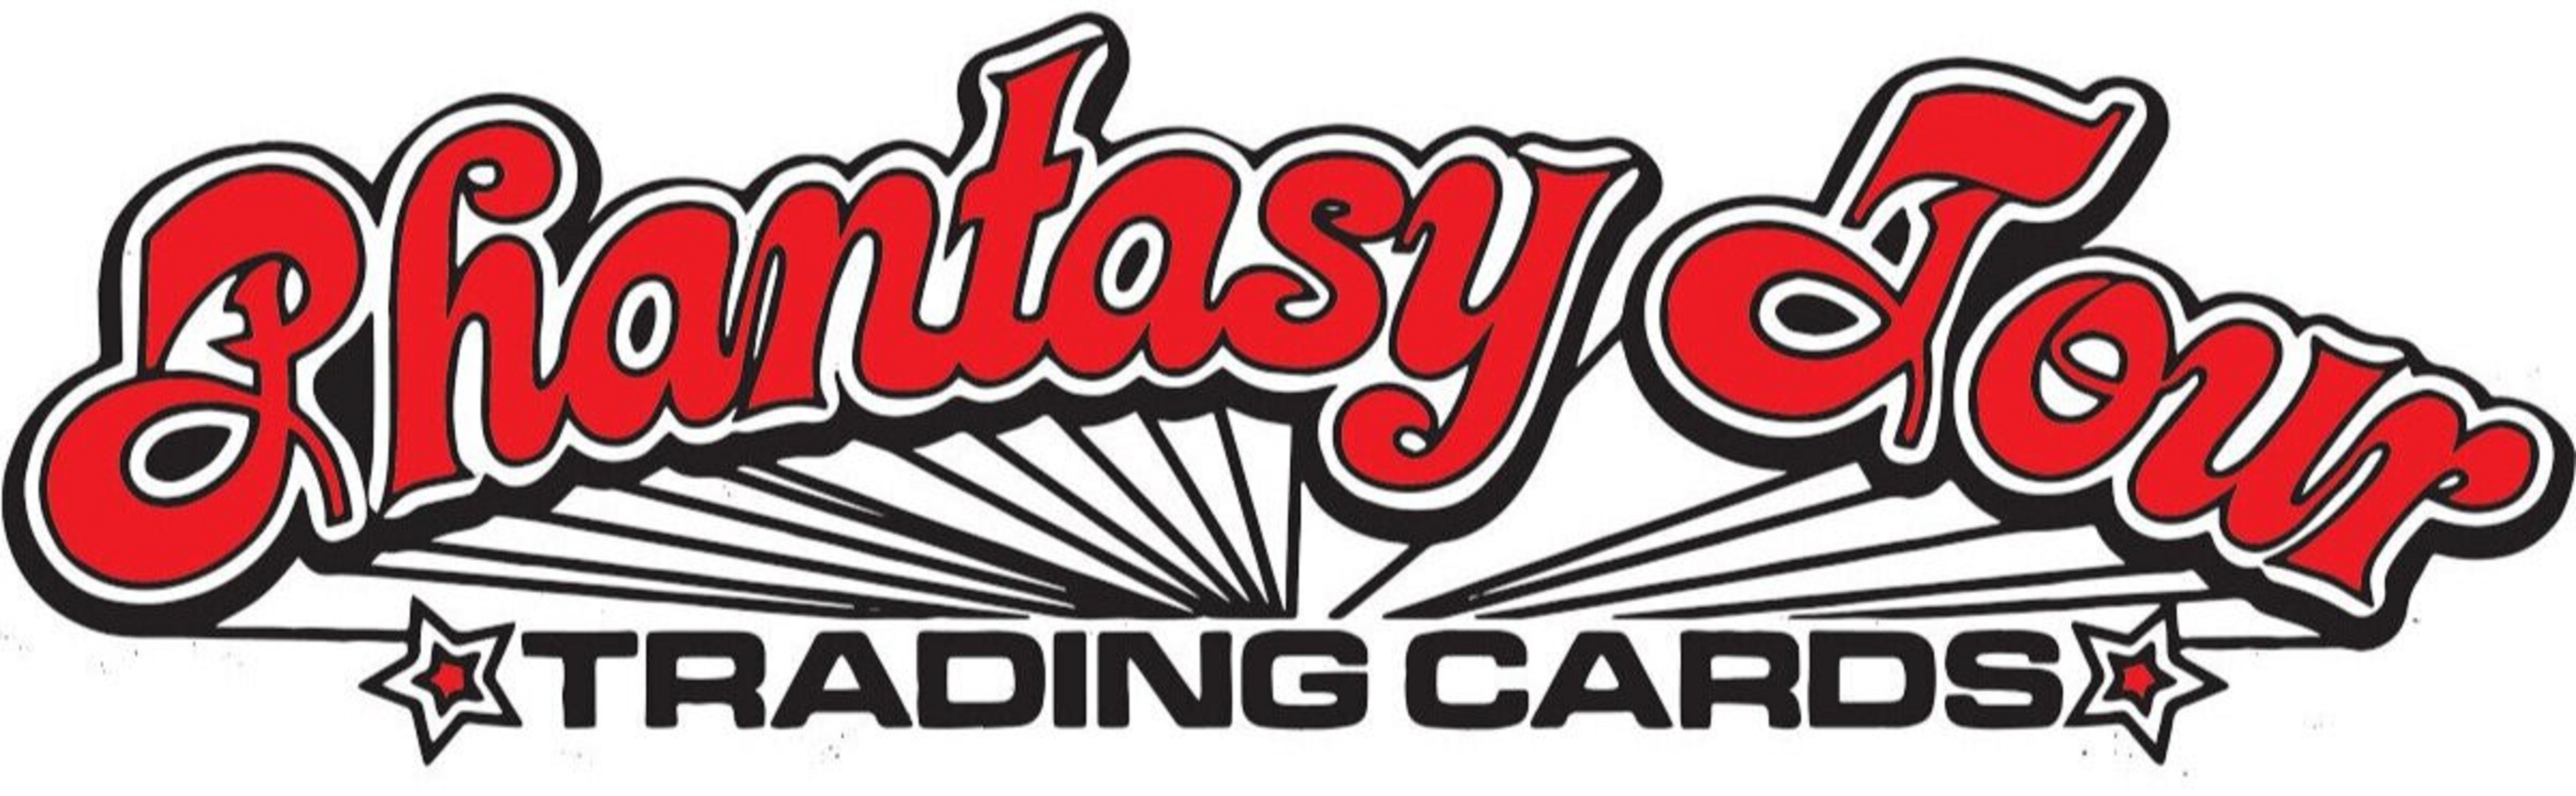 Phantasy Tour Collaborates with the National Independent Venue Association (NIVA) on Venue Trading Cards Series